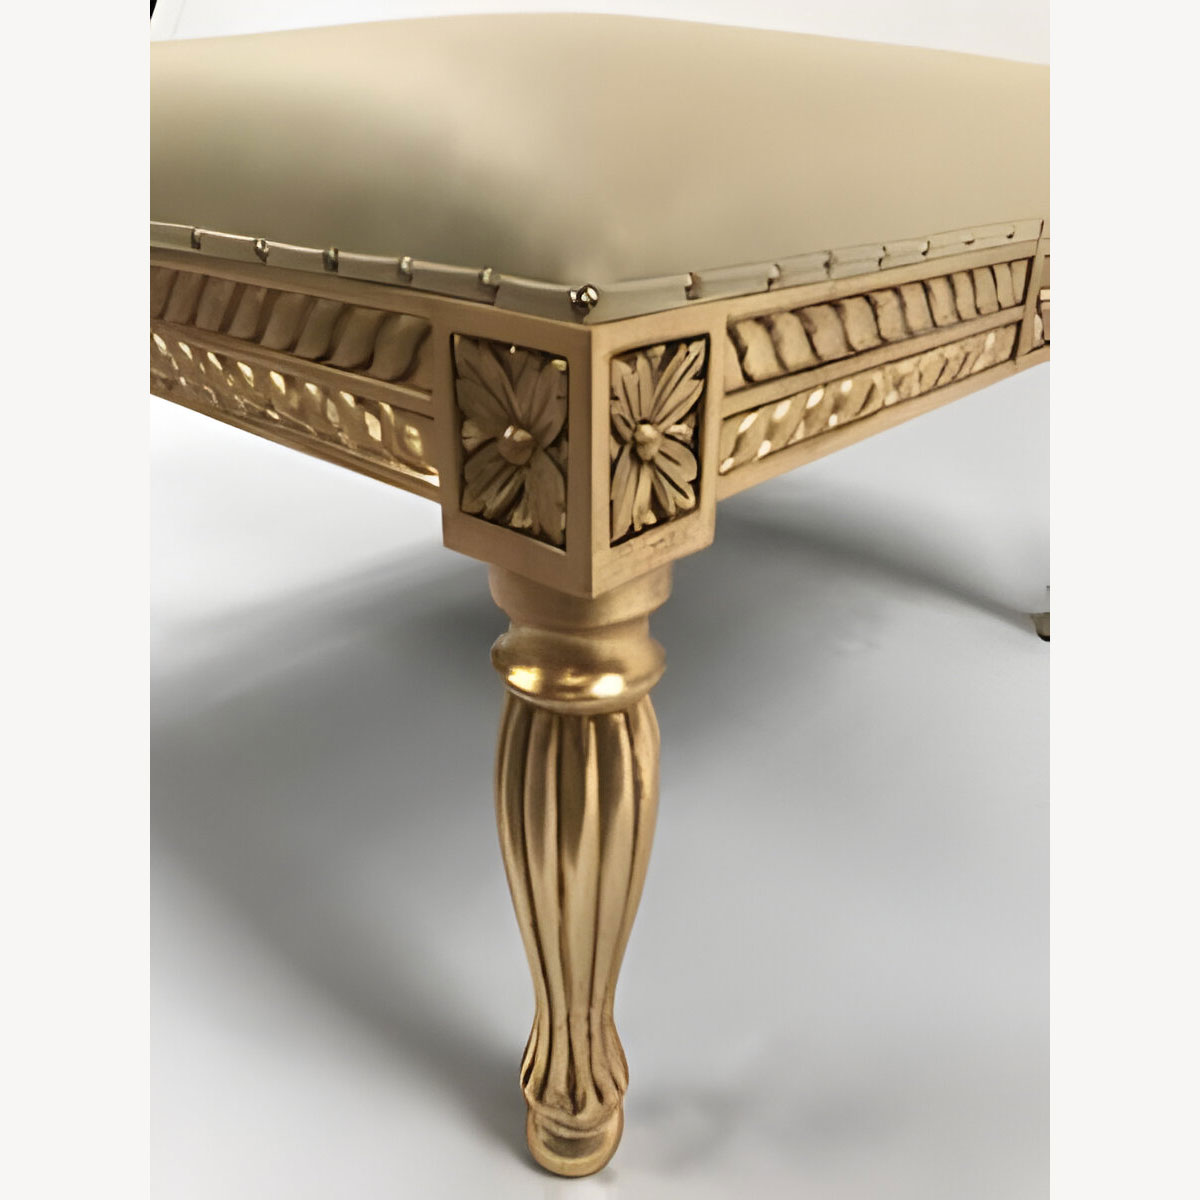 Wedding Large Stool Gold Leaf Frame With Easiclean Faux Leather 6 - Hampshire Barn Interiors - Wedding Large Stool Gold Leaf Frame With Easiclean Faux Leather -